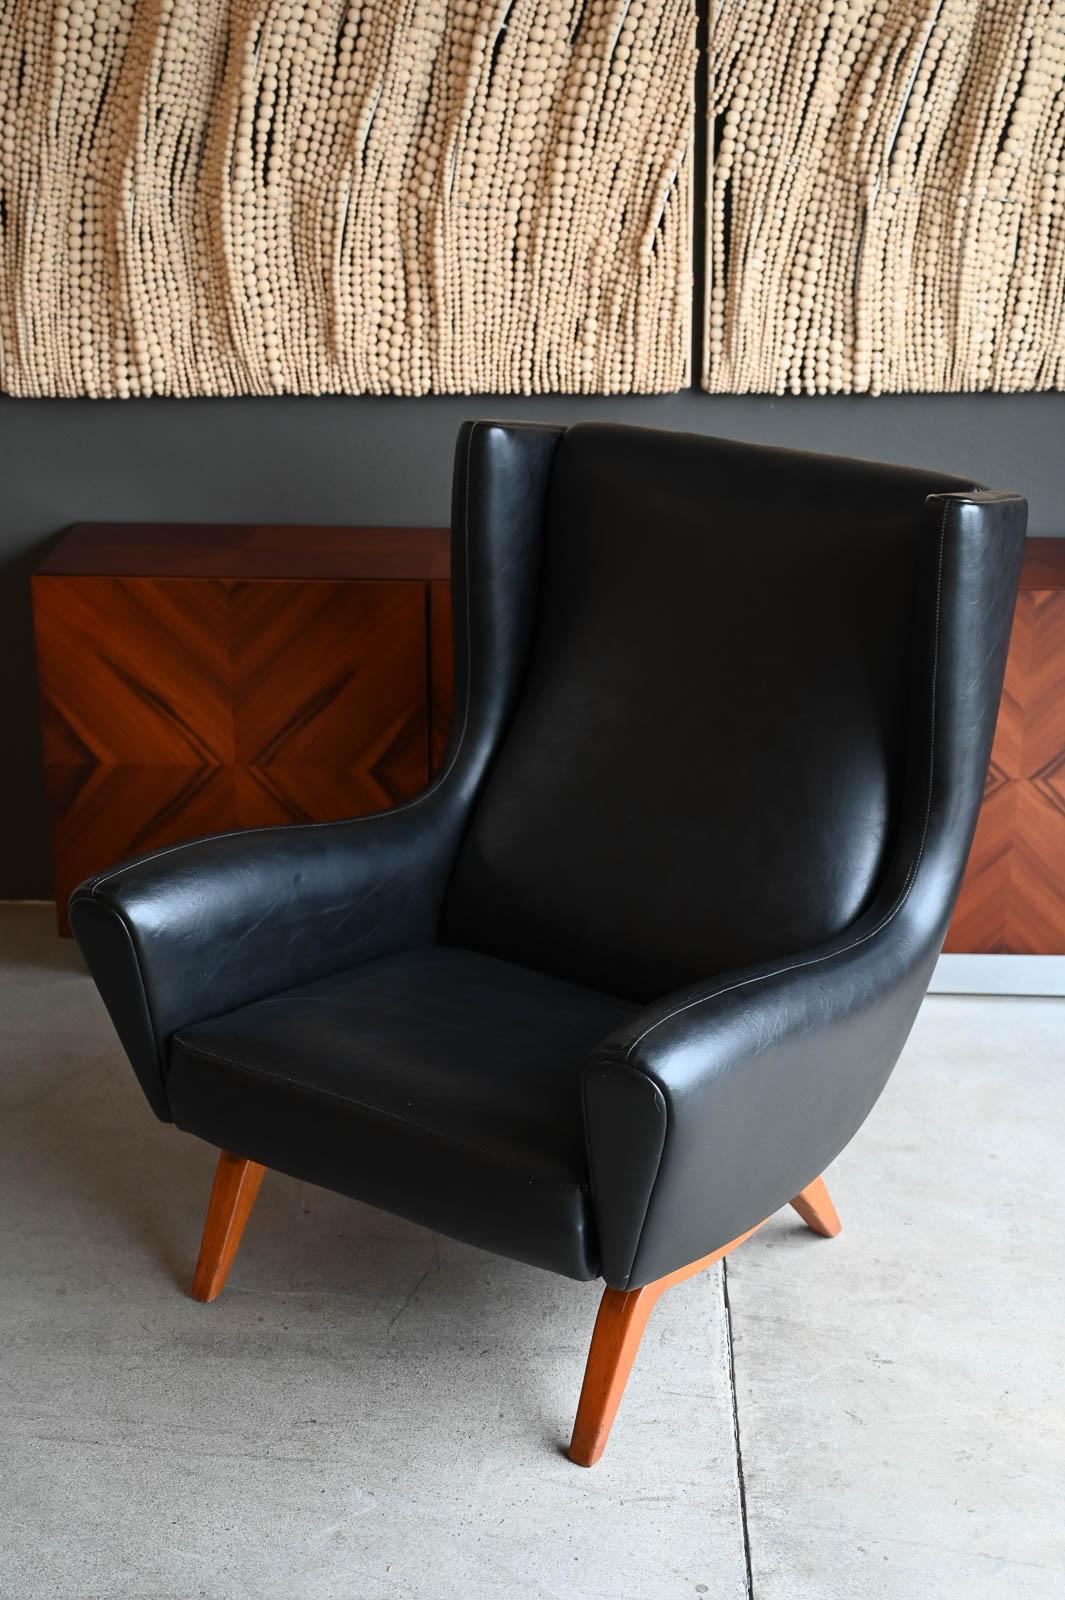 Illum Wikkelso for Soren Willadsen Model 110 Wingback Lounge Chair, ca. 1955.  Exceptional vintage ALL ORGINAL condition, this piece is museum worthy and in wonderful vintage condition with original black leather.  Very comfortable, able to seat a